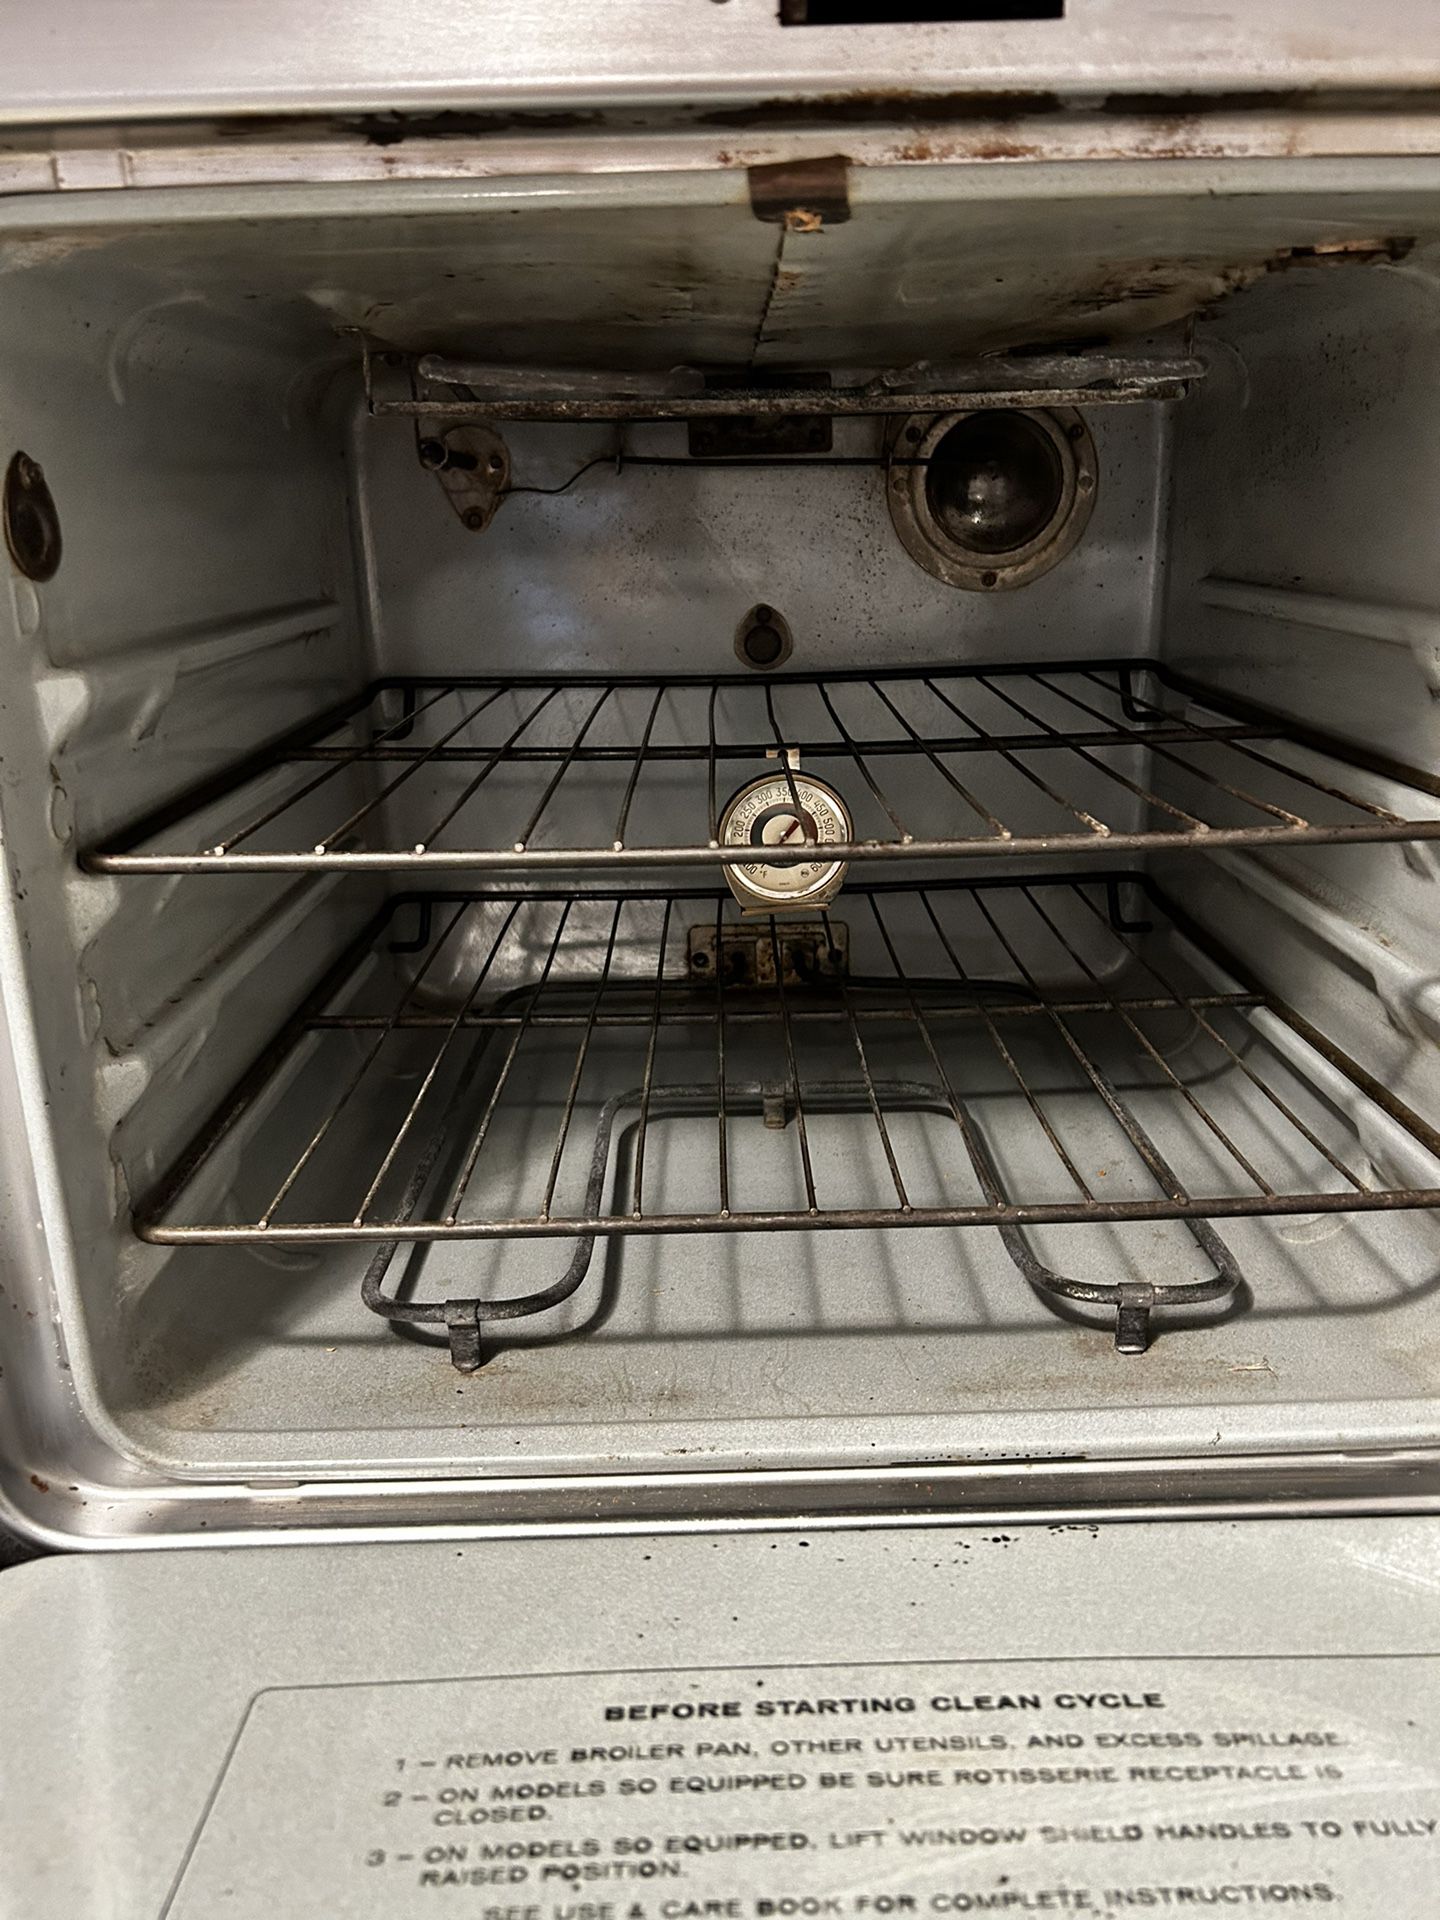 Ninja Foodie Double Oven Dct451 for Sale in Hollywood, FL - OfferUp